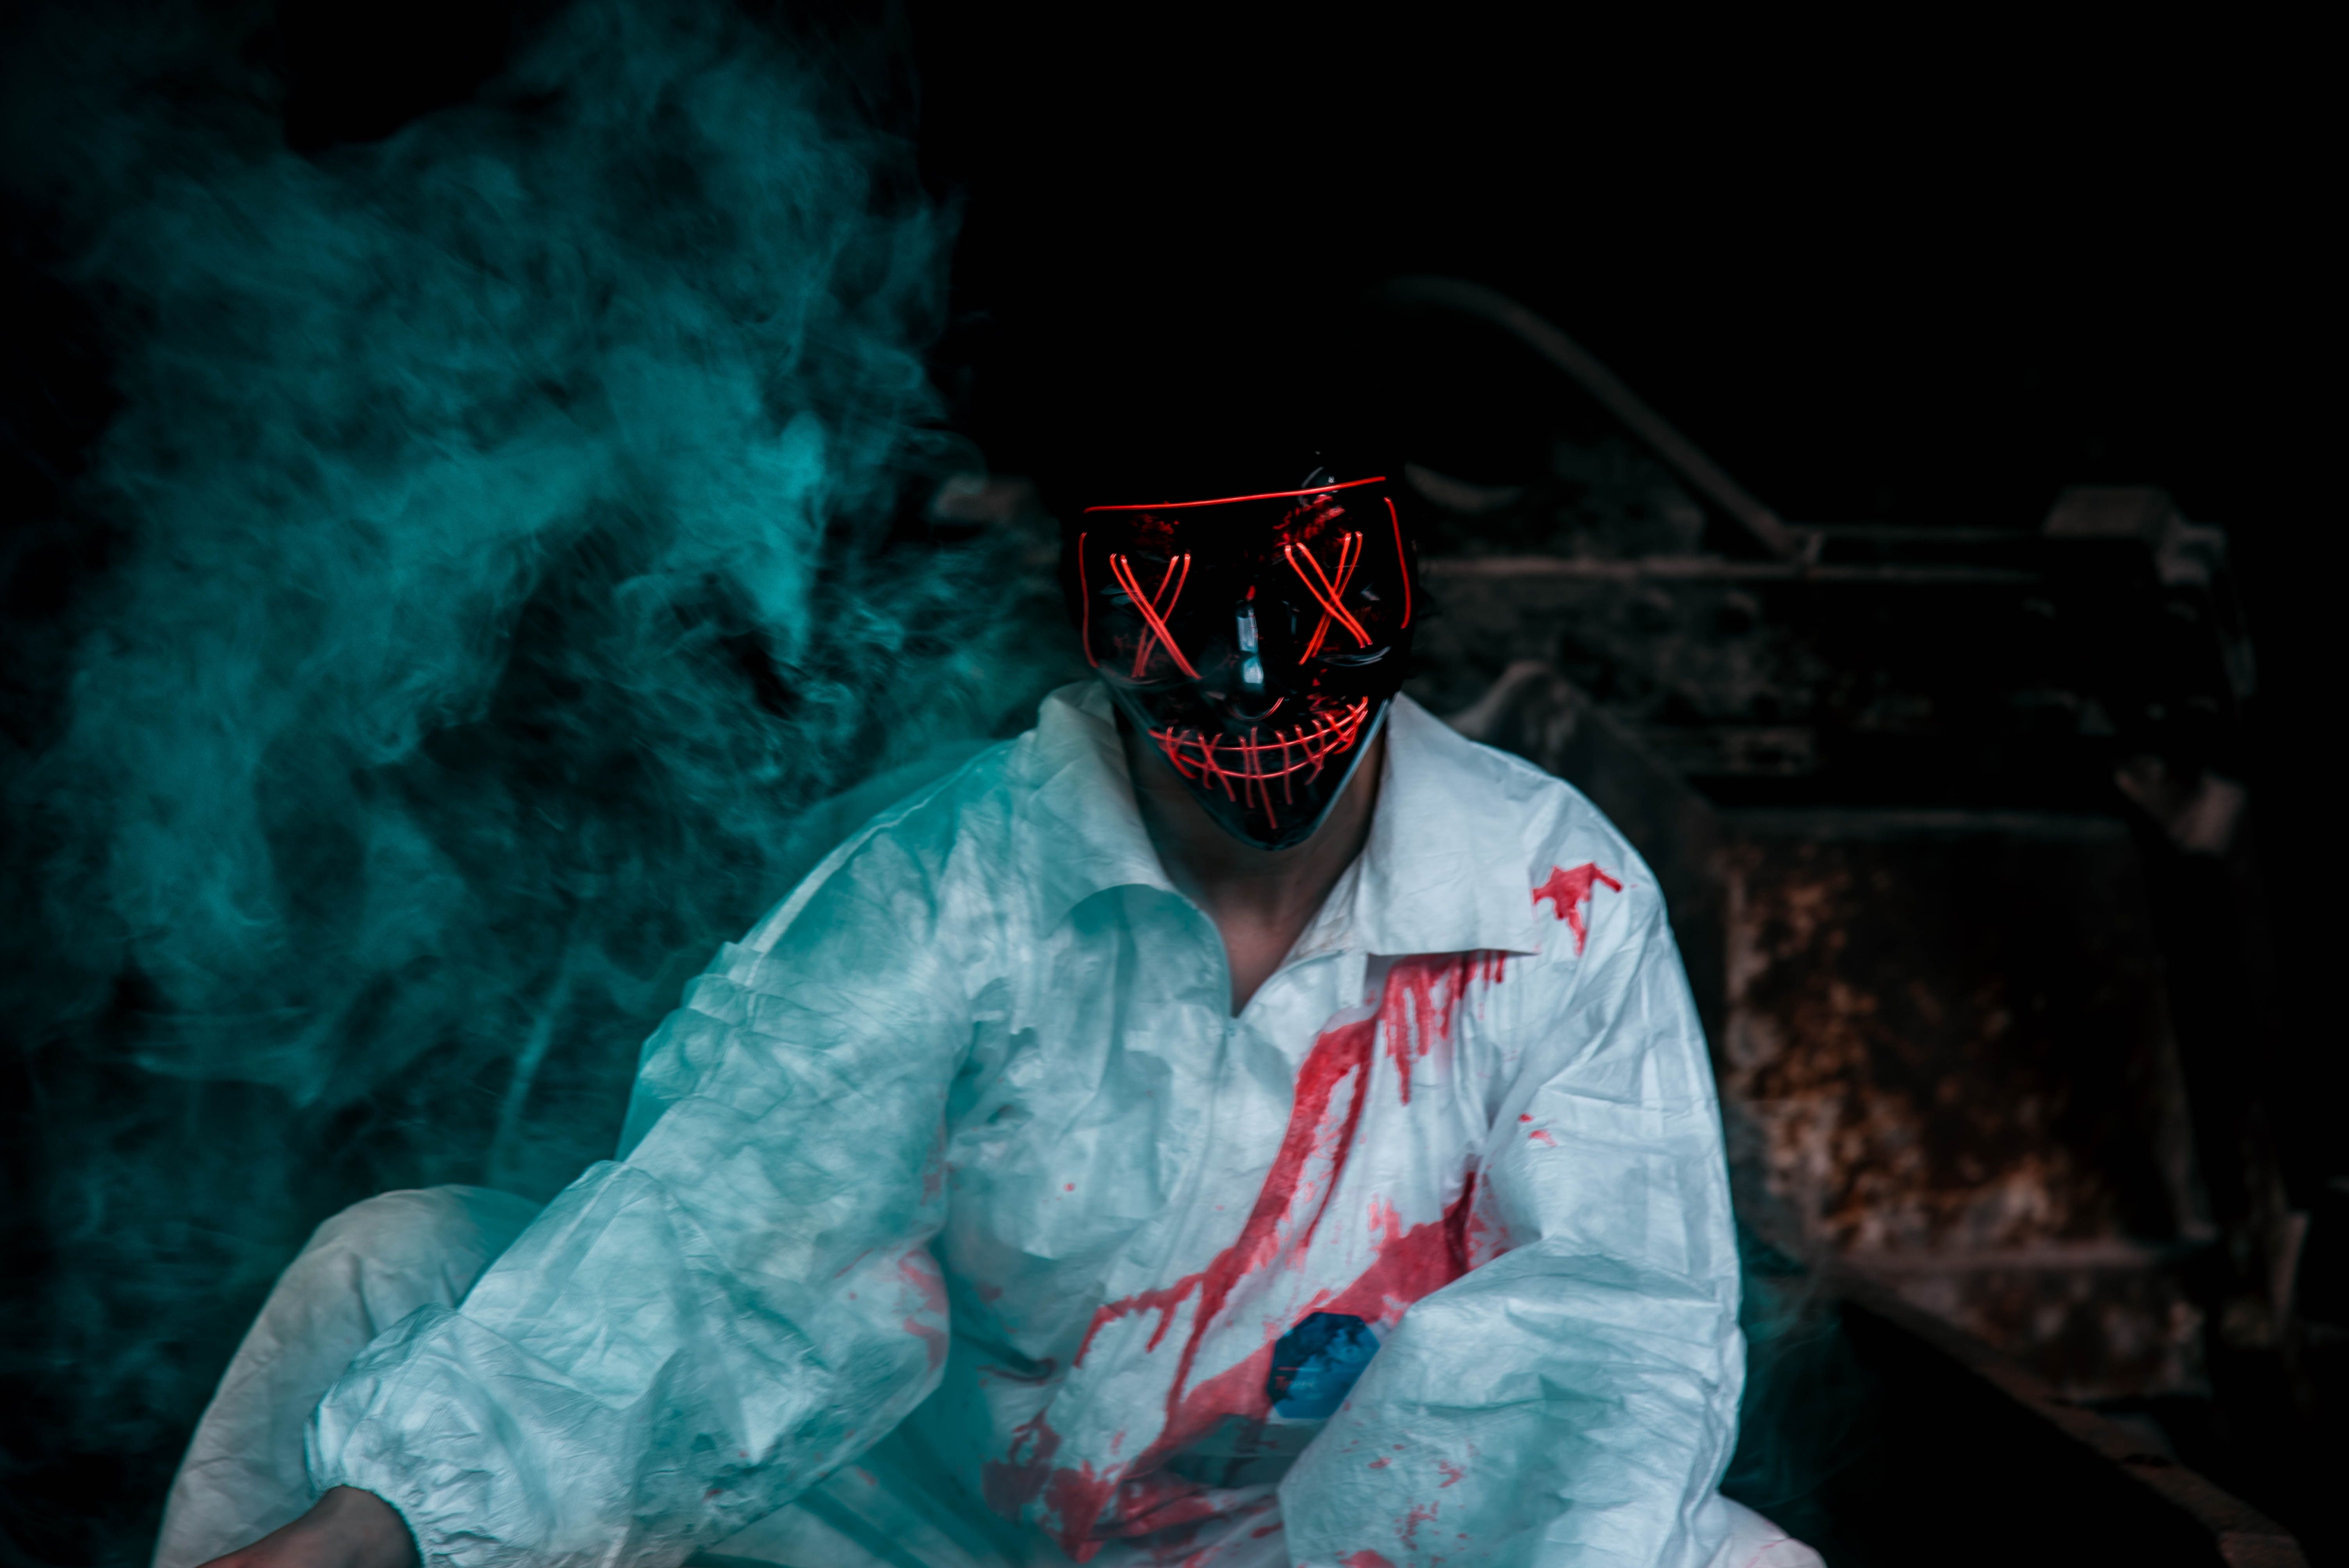 A scary clown with a red LED mask and blood on his shirt - Blood